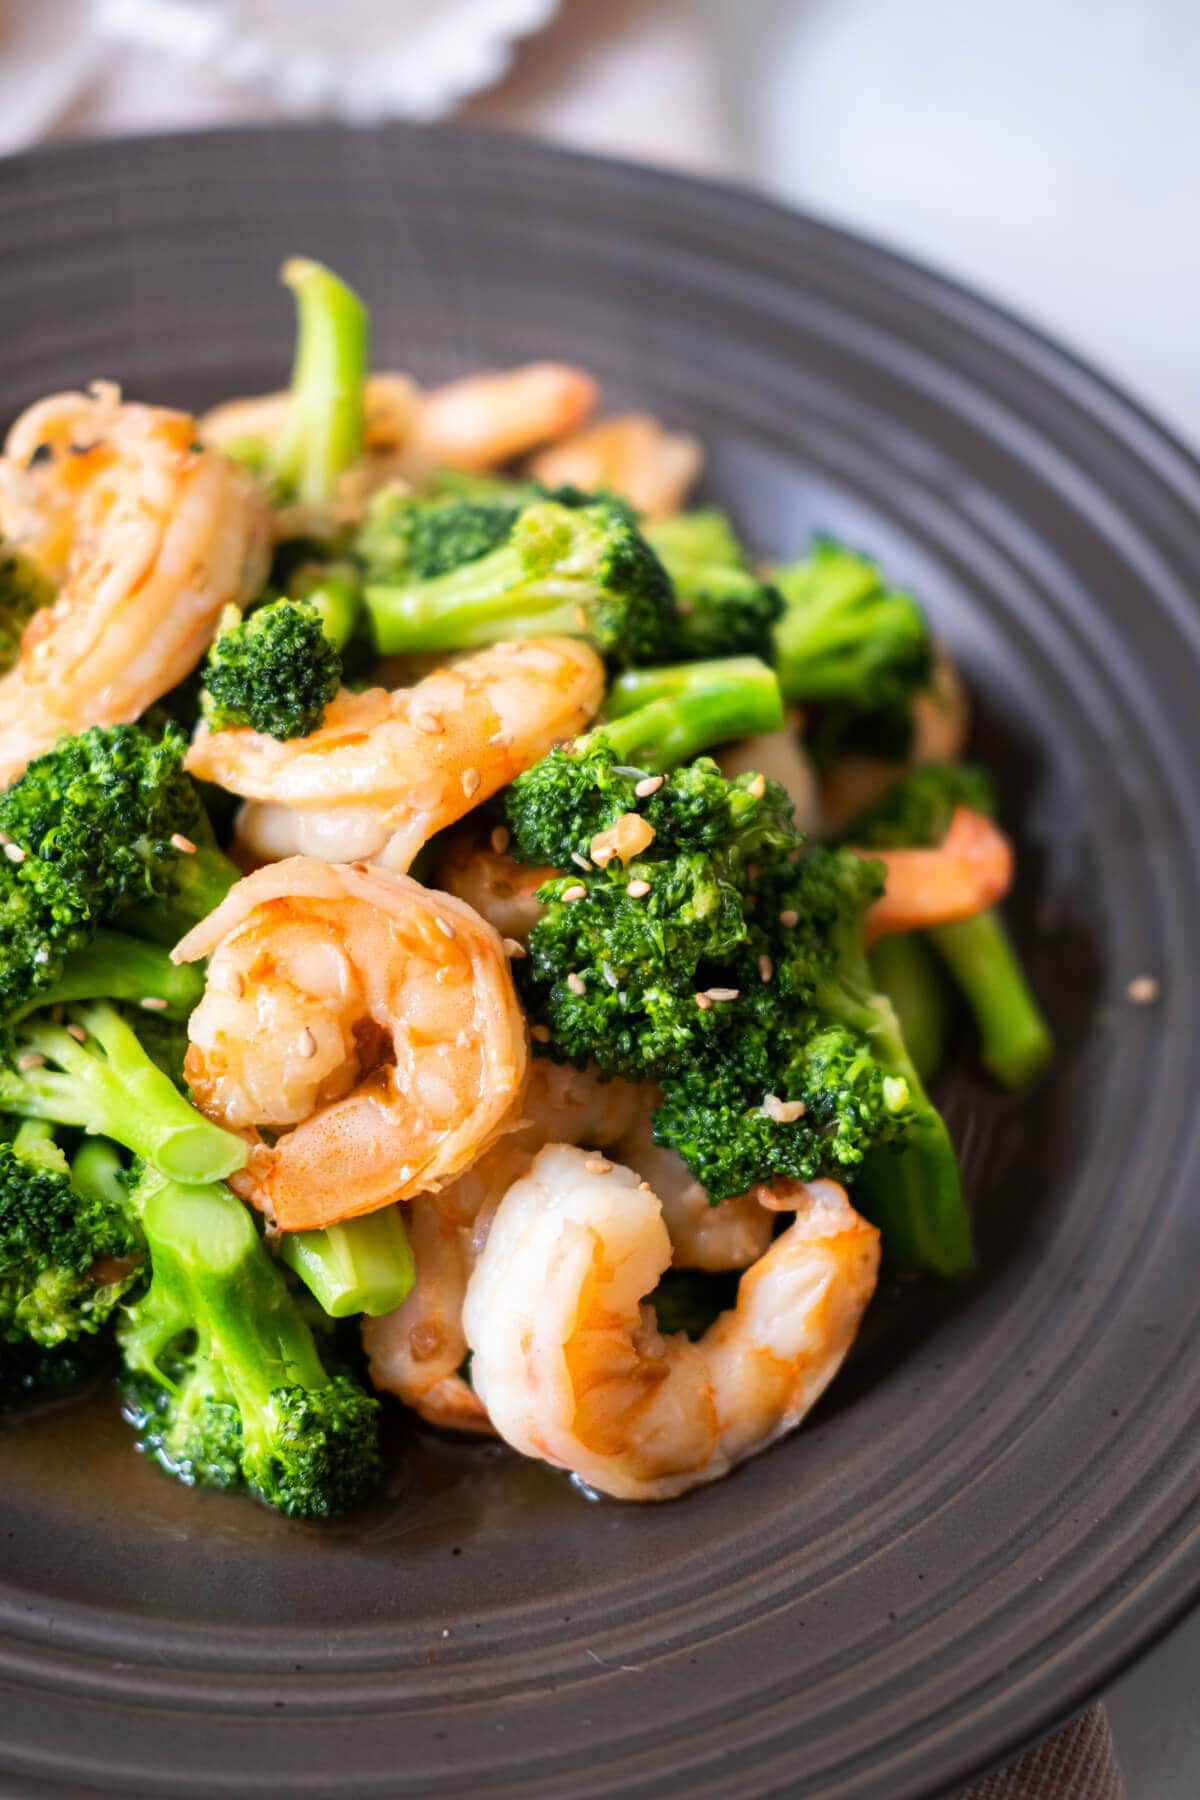 Healthy stir-fried broccoli and shrimps served hot with white sesame seeds on top and a napkin placed behind it.